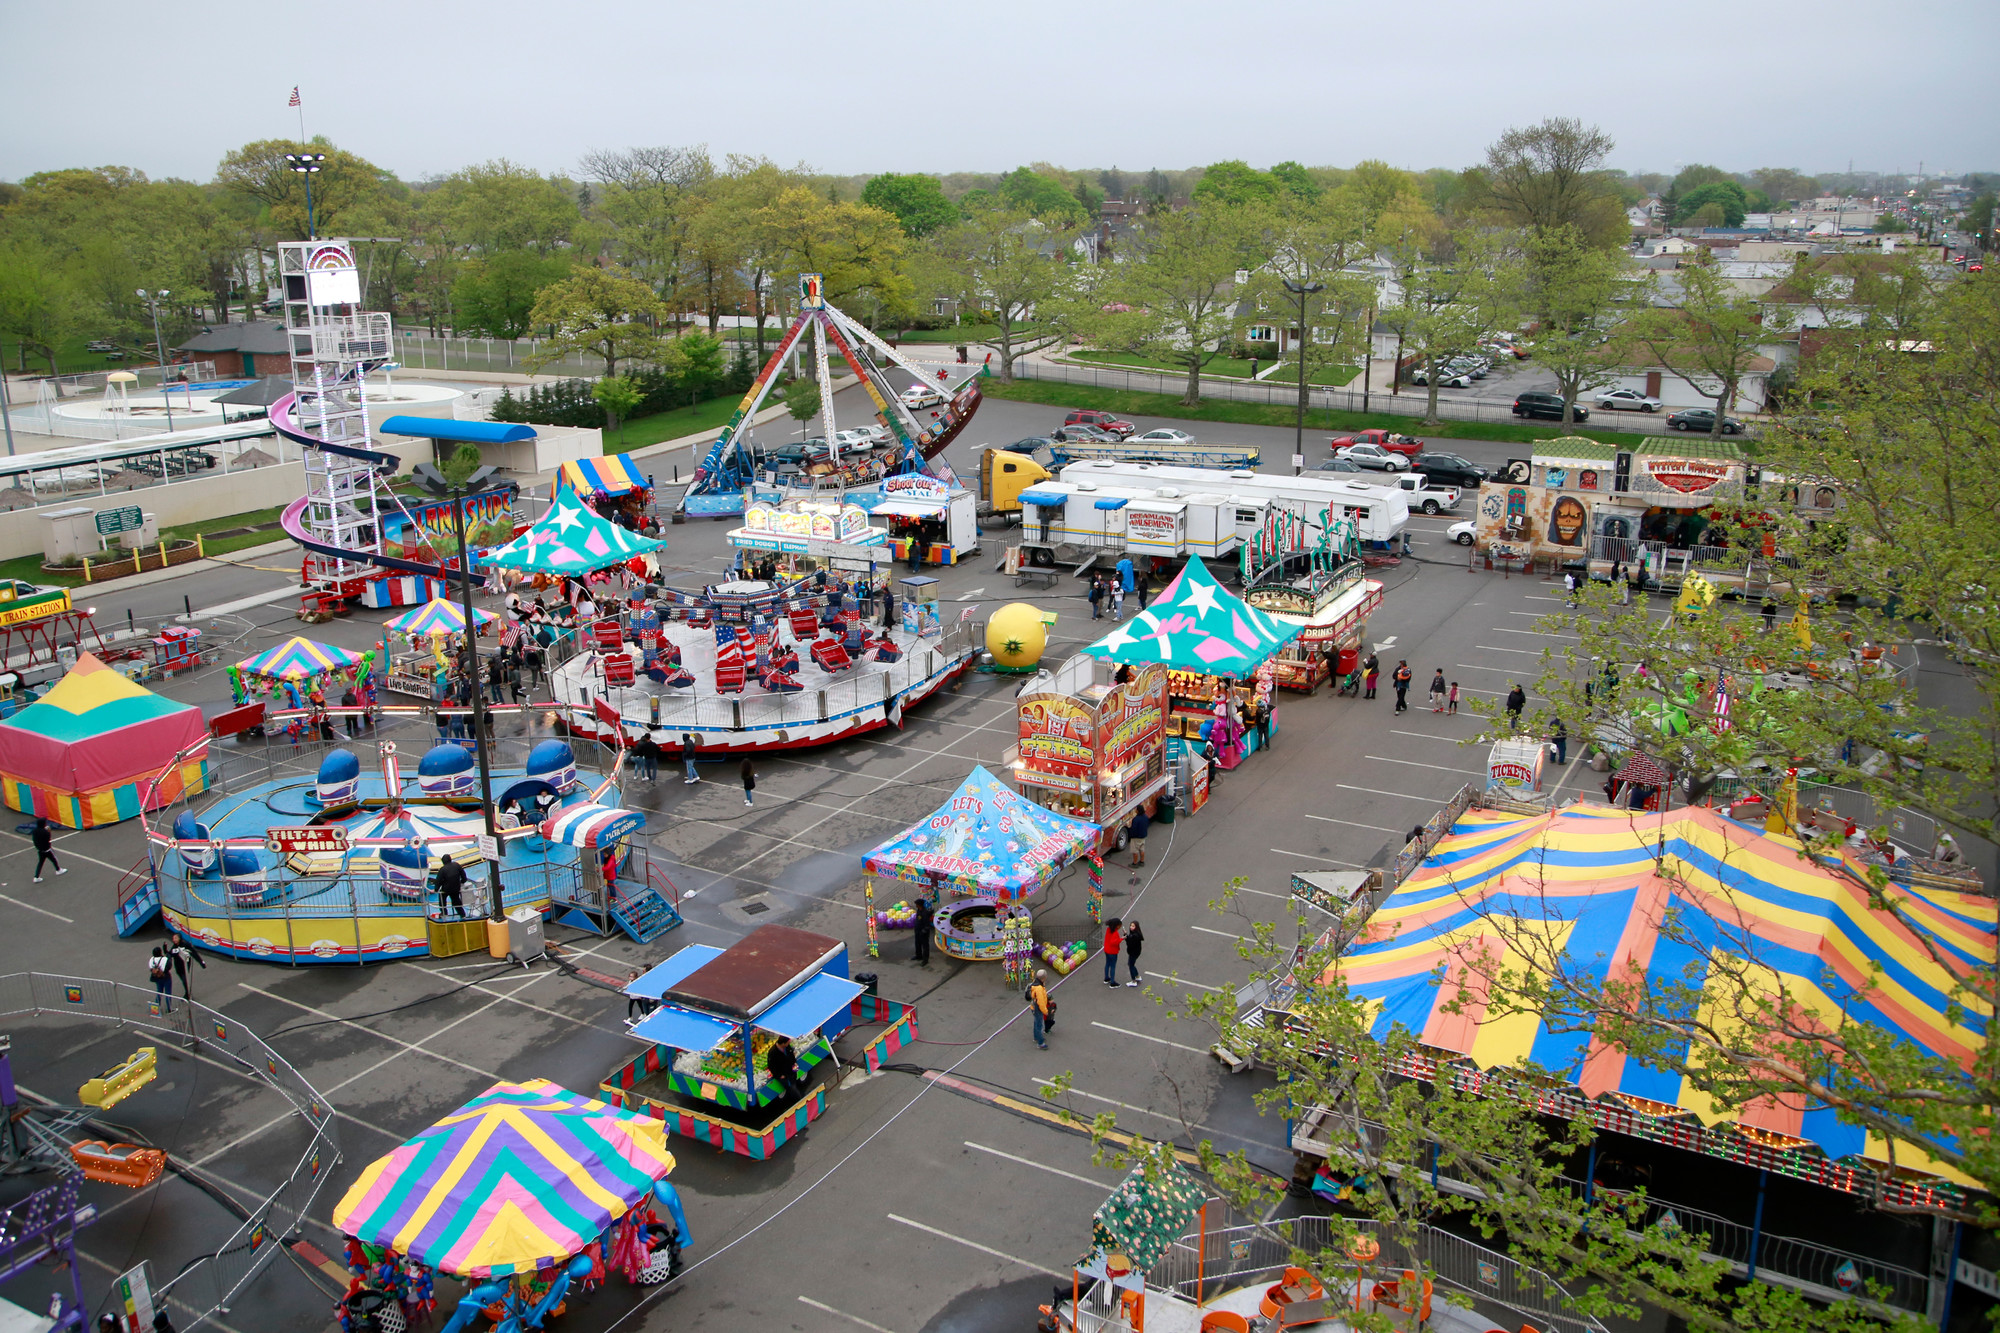 The view from the Ferris wheel, which towered more than 70 feet above the ground.